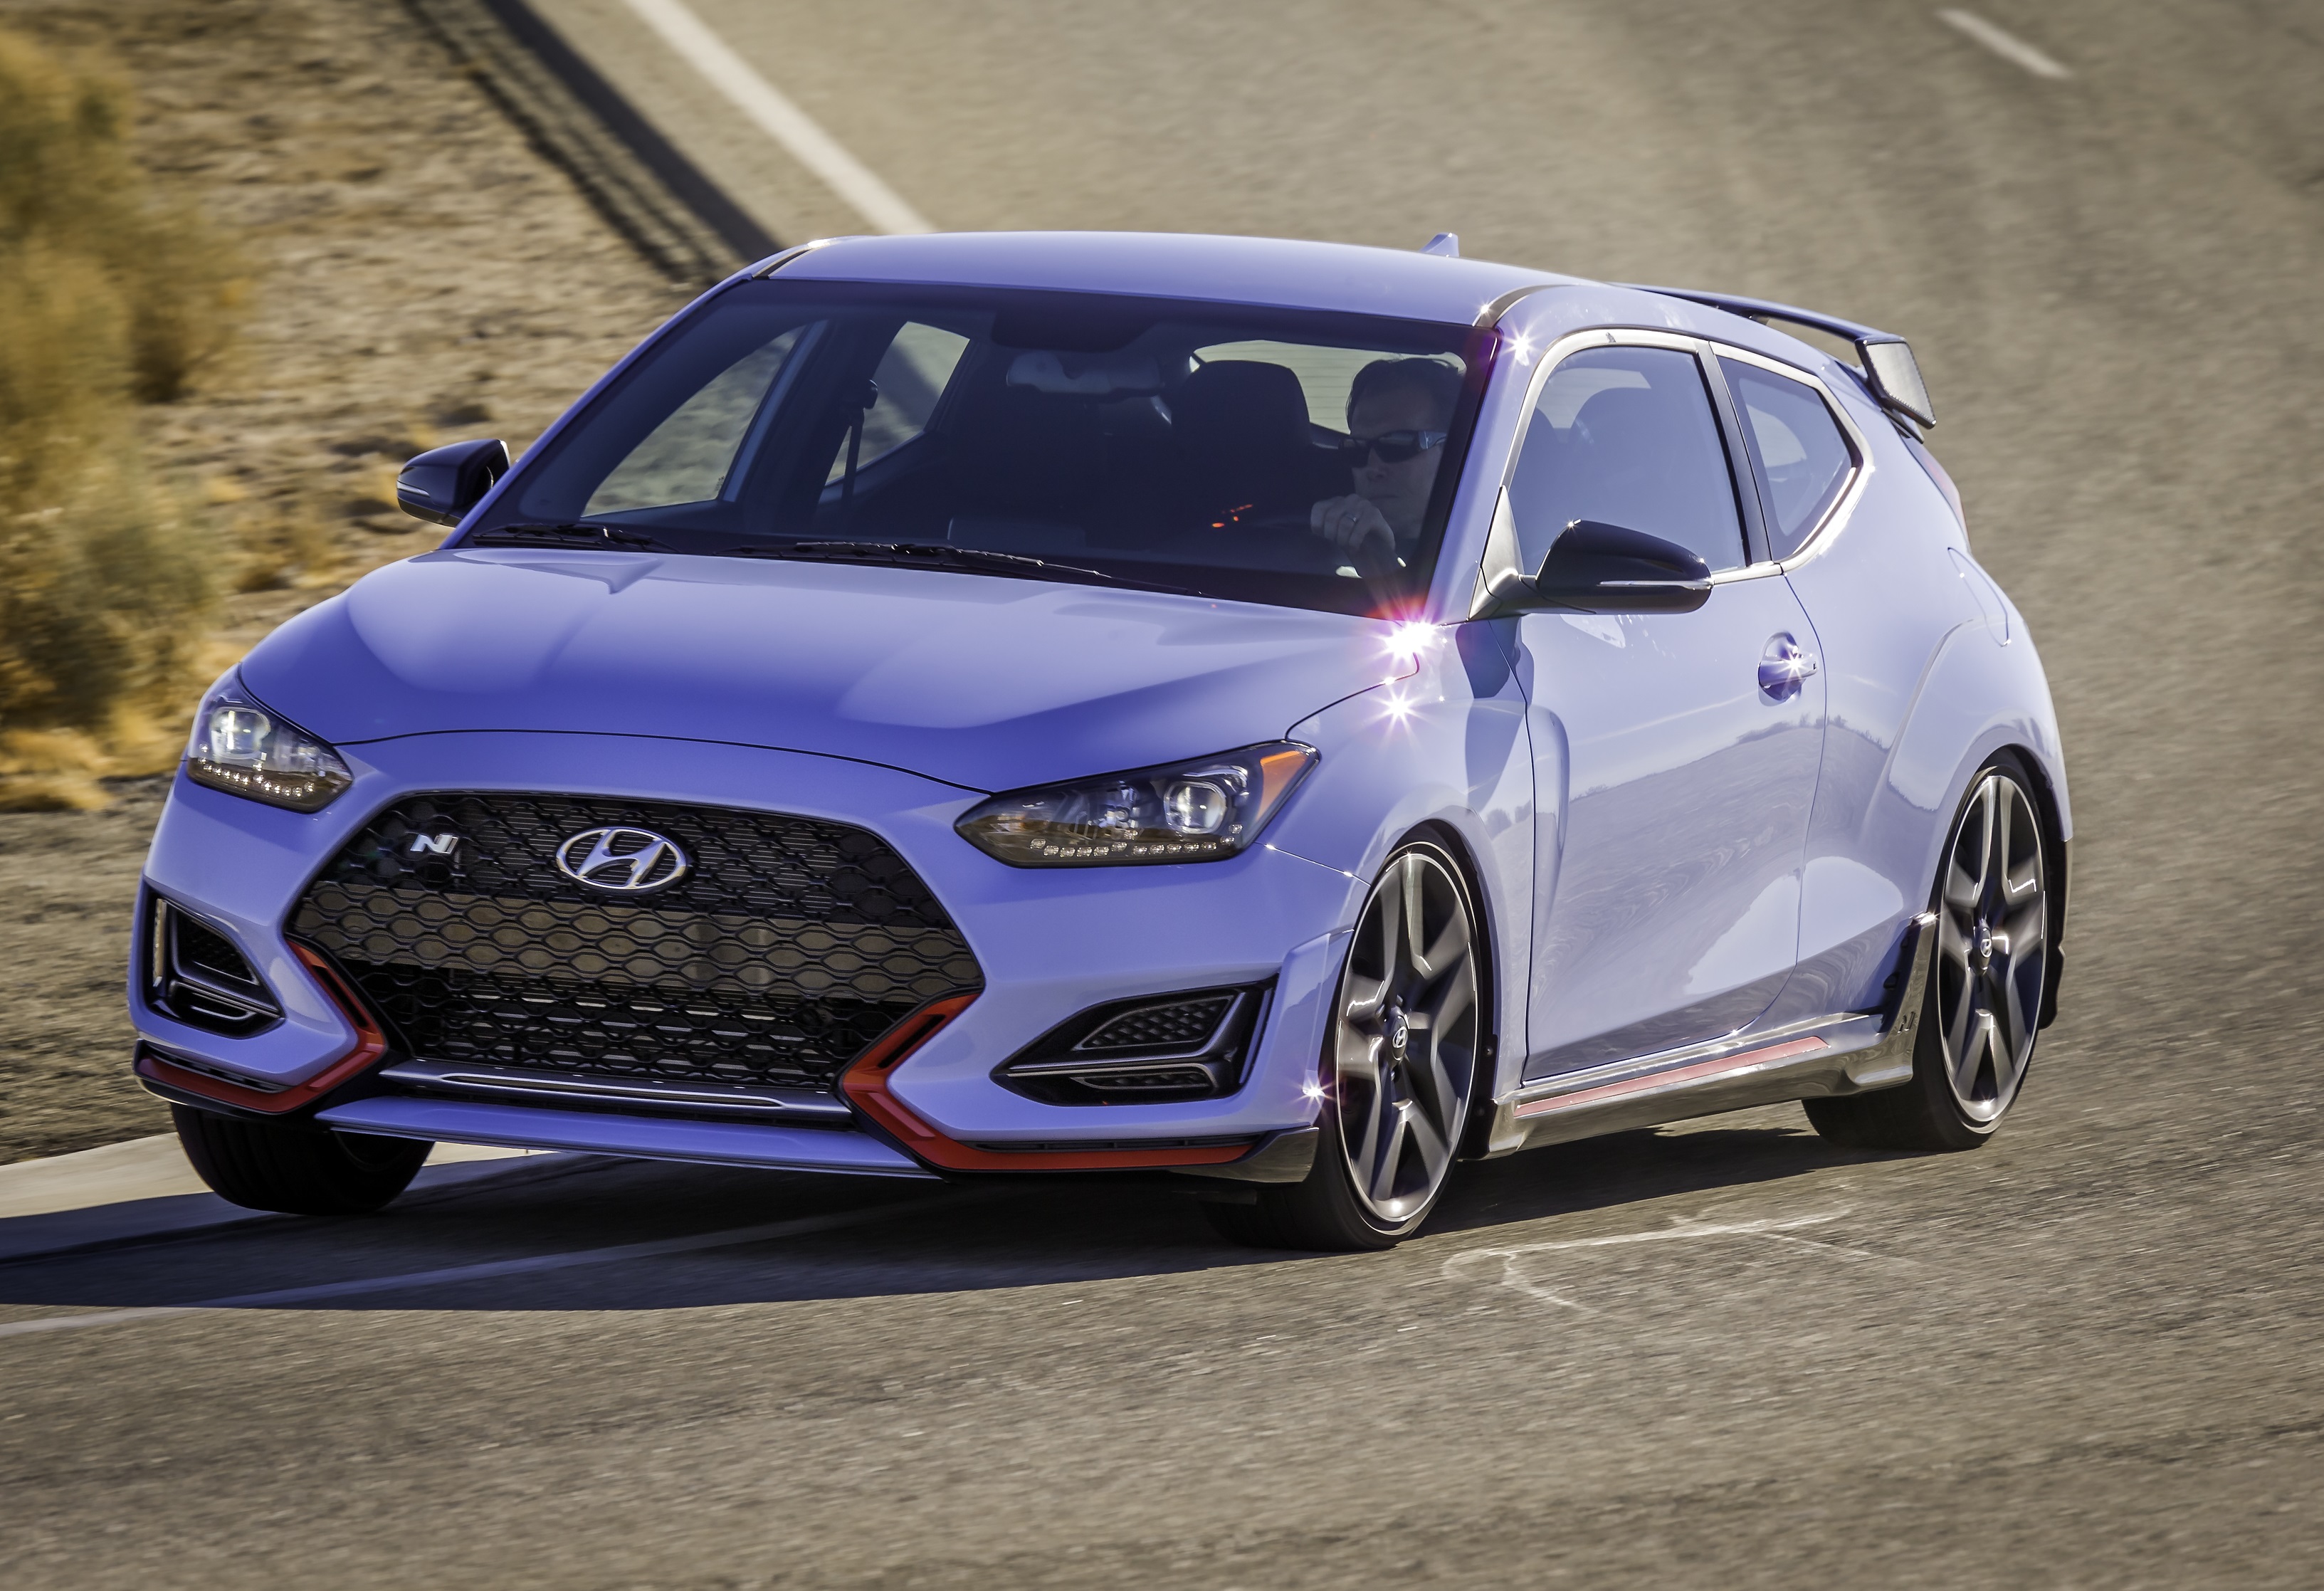 Hyundai Veloster N exterior specifications